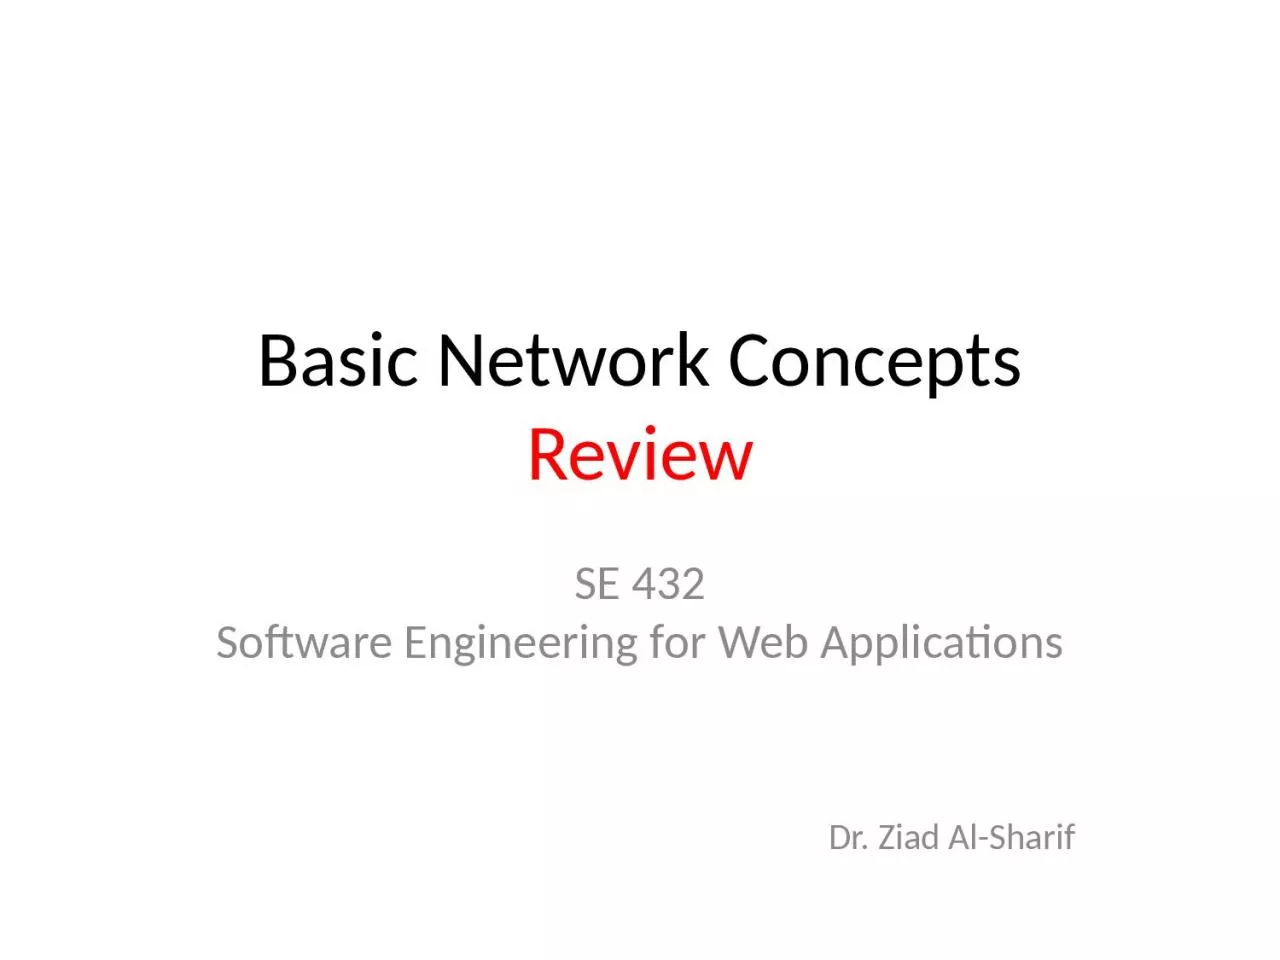 Basic Network Concepts Review